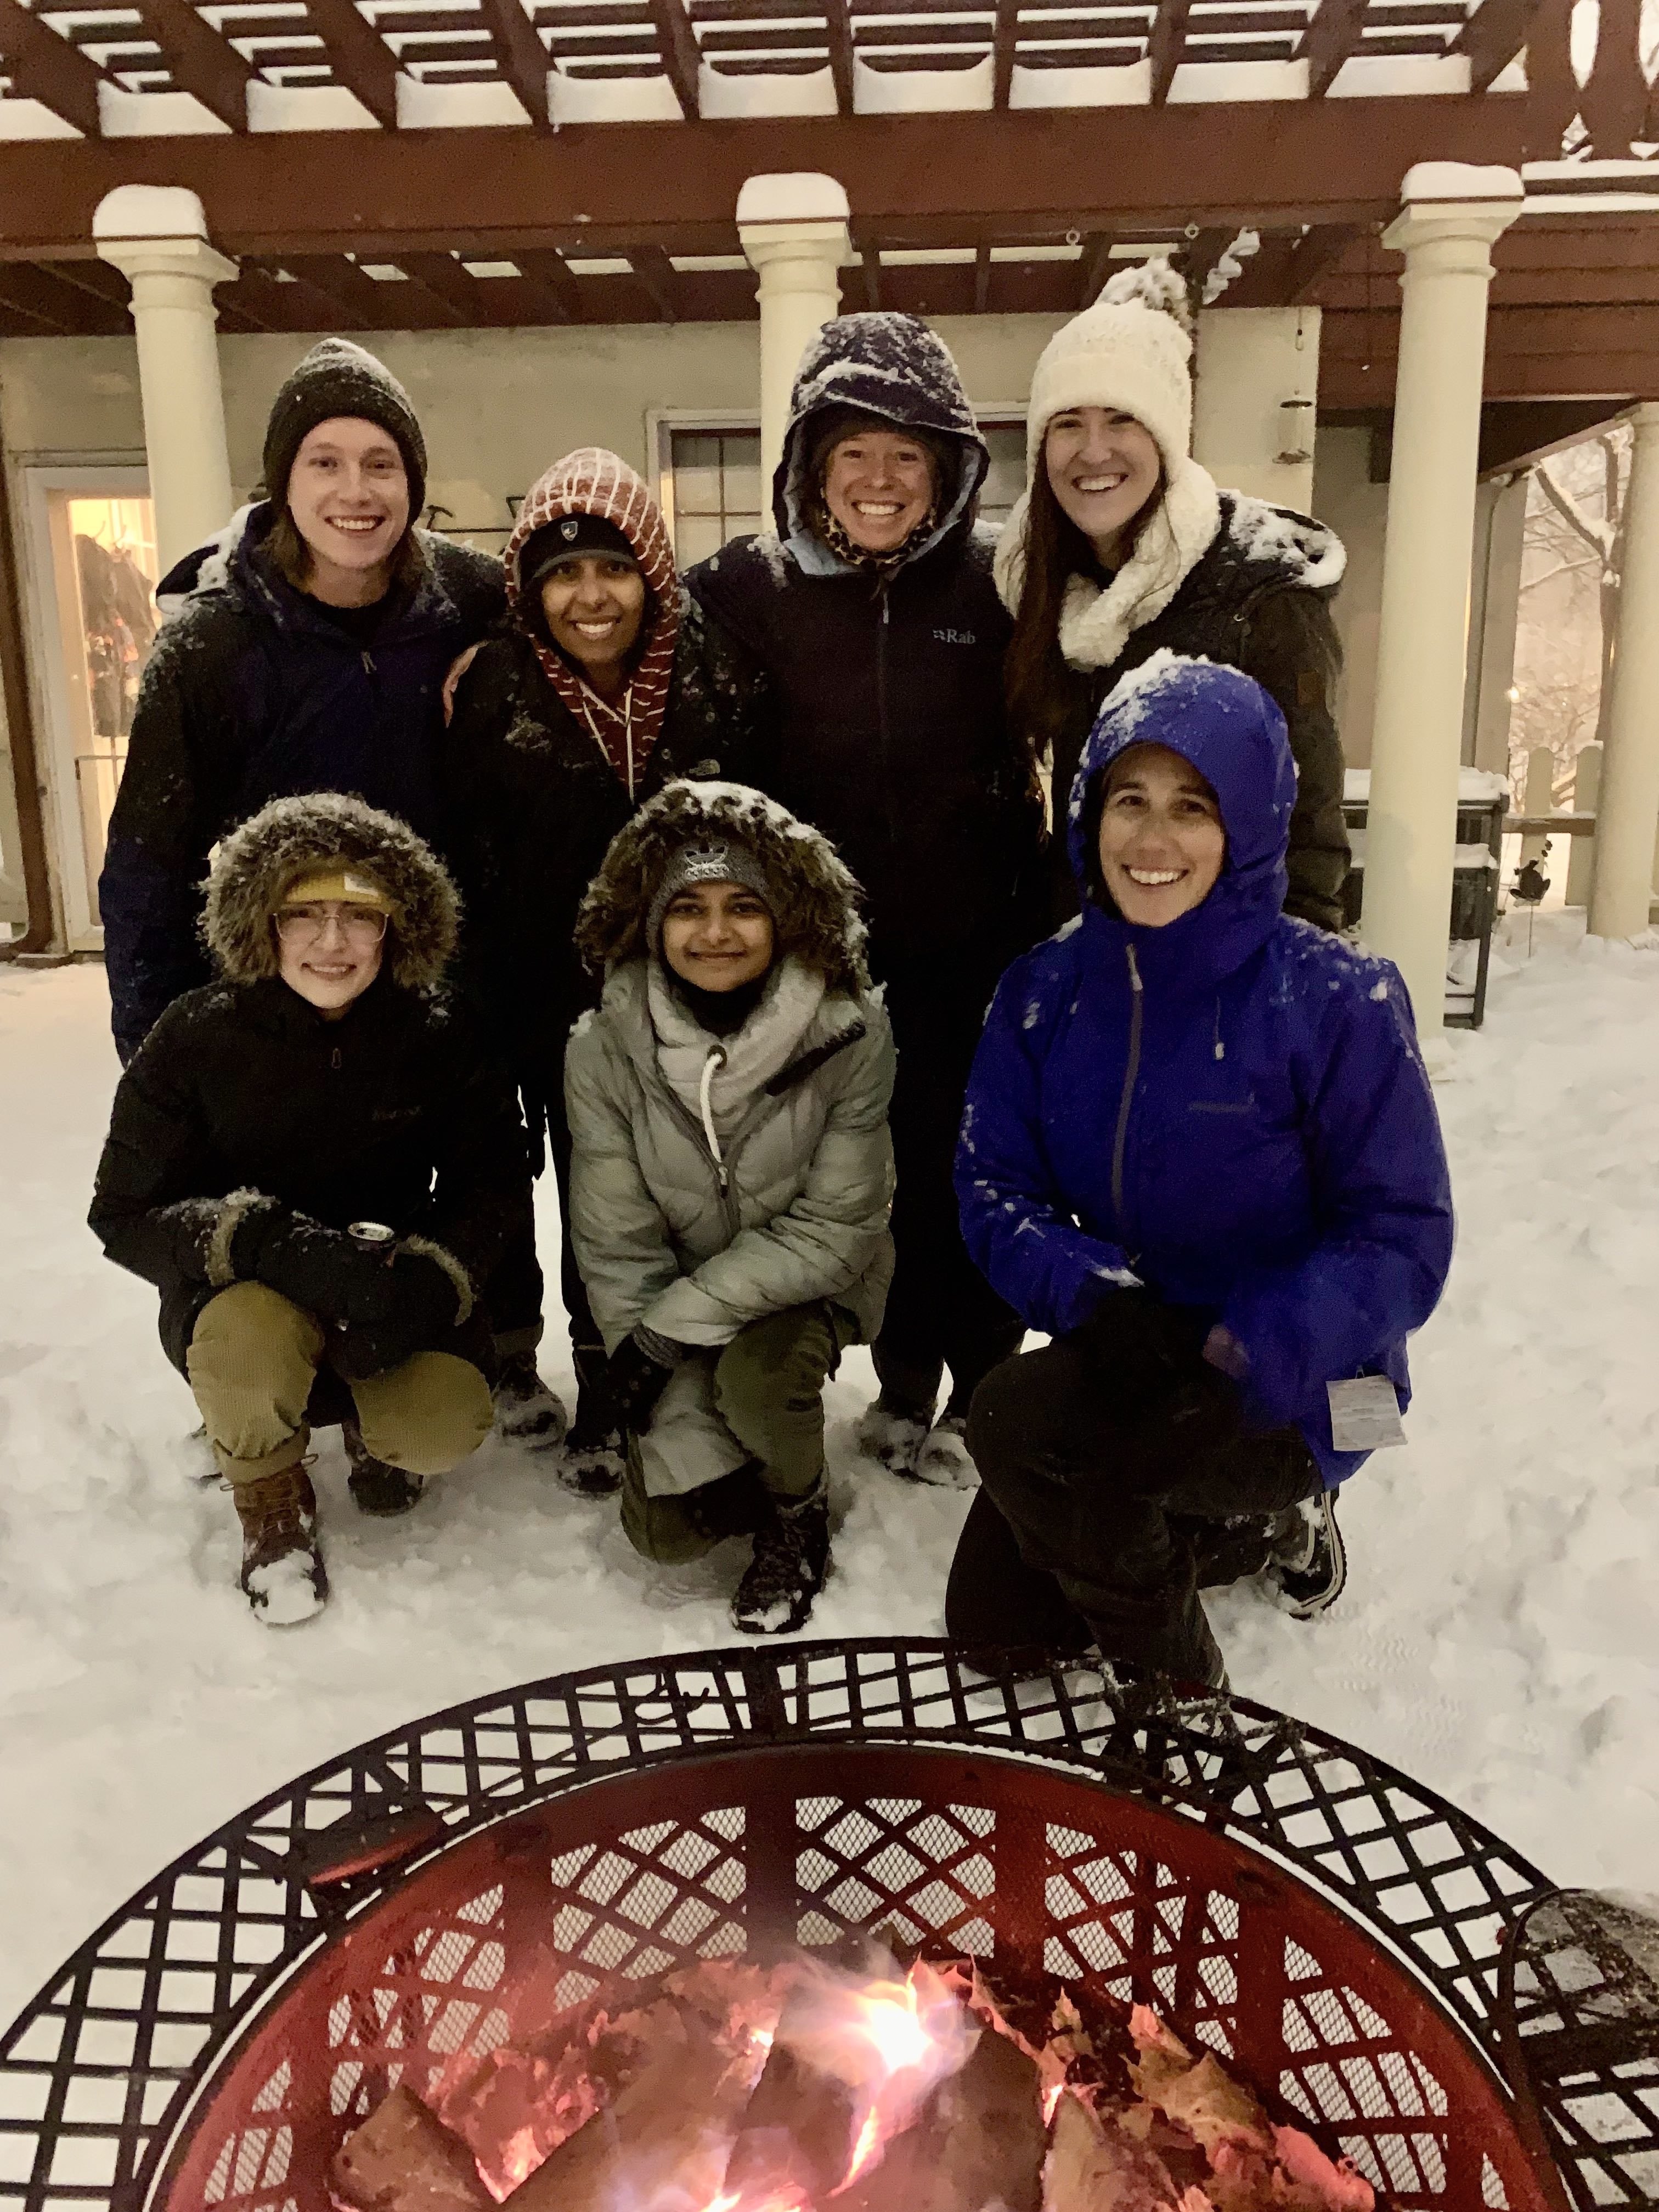 Group members and family of the Santelli Lab in front of an outdoor firepit with snow falling around them.